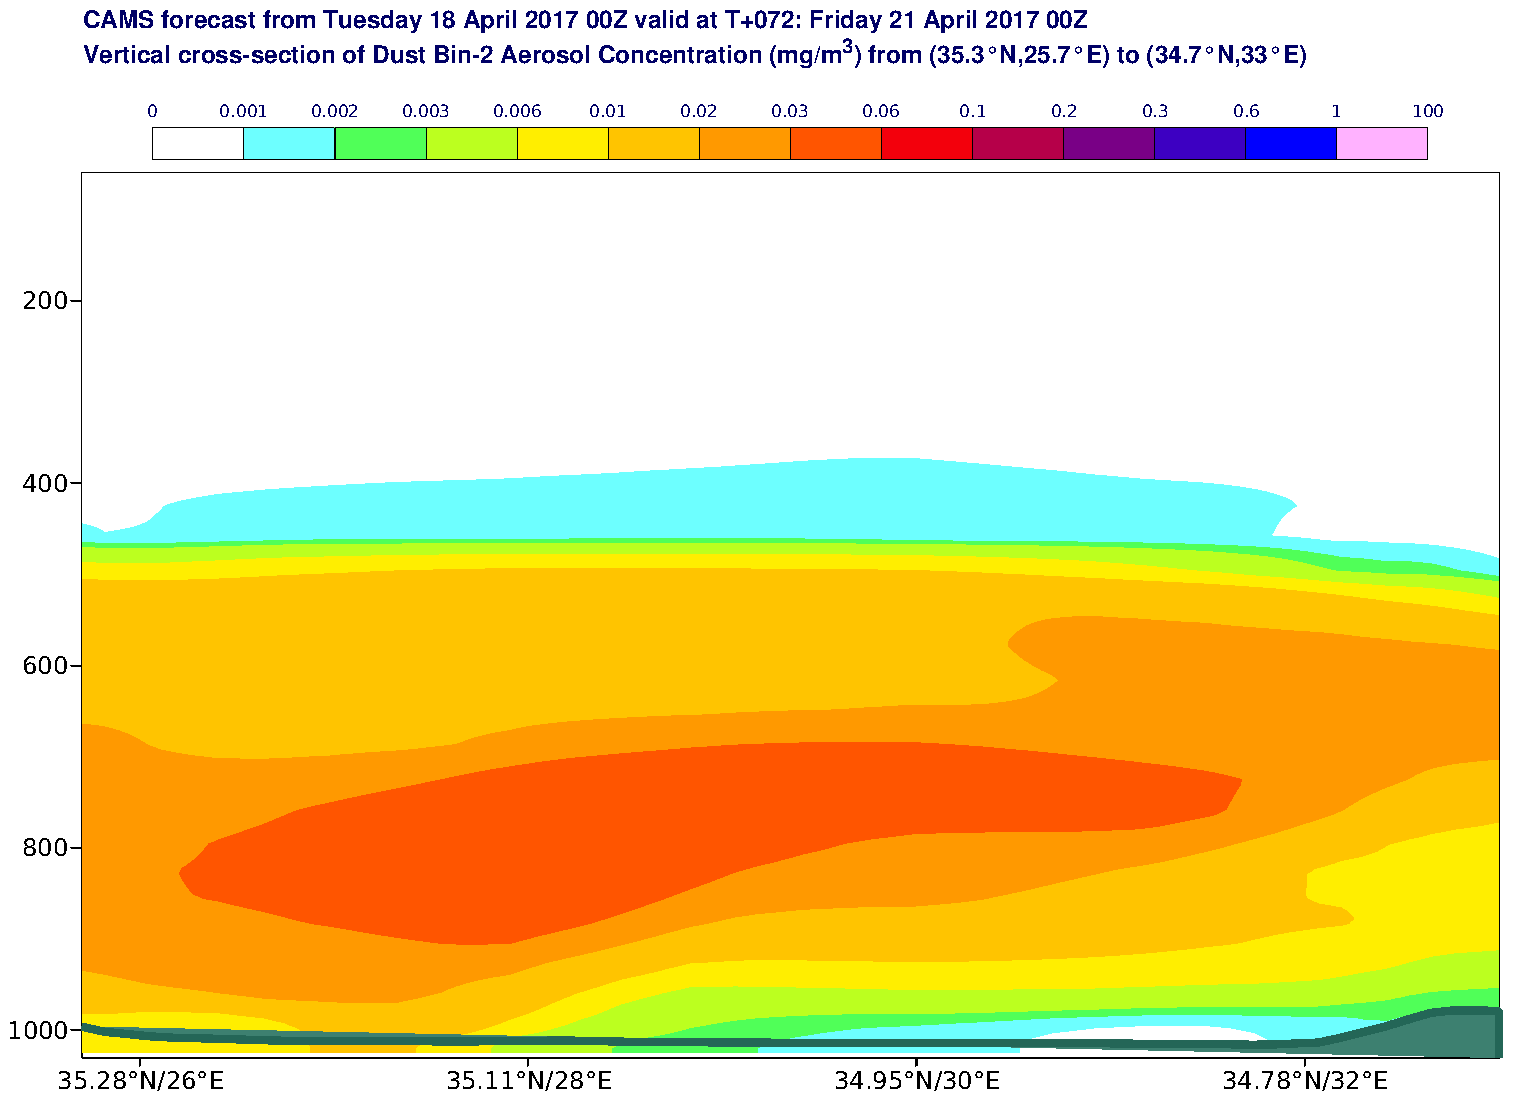 Vertical cross-section of Dust Bin-2 Aerosol Concentration (mg/m3) valid at T72 - 2017-04-21 00:00